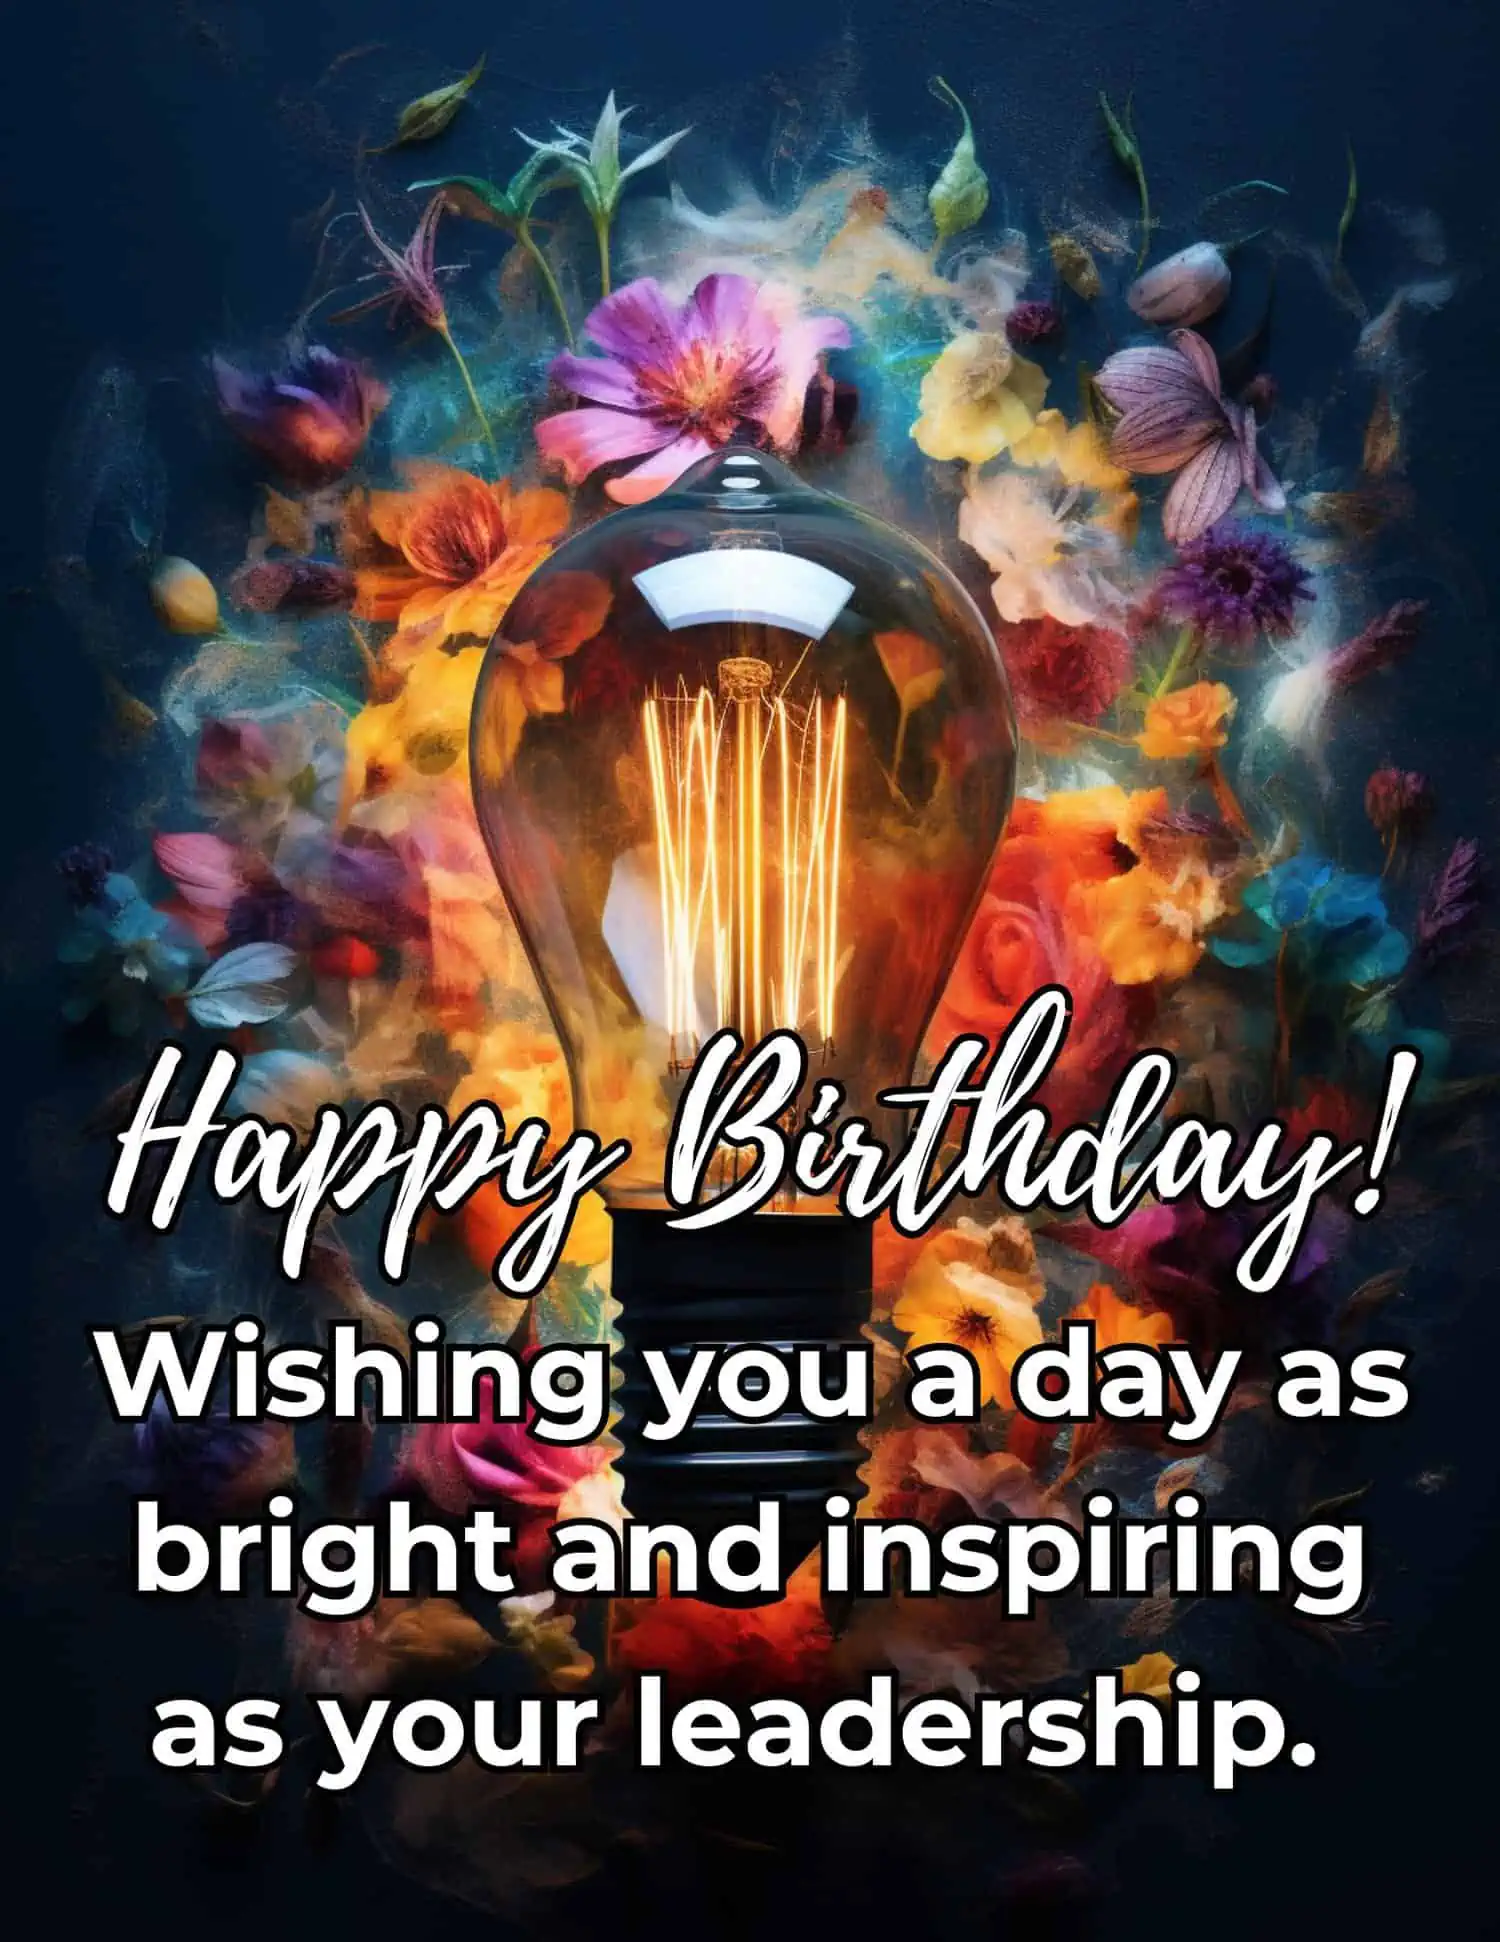 Convey your respectful and heartfelt birthday wishes to your female boss, acknowledging her leadership, strength, and the inspiration she brings to the team.